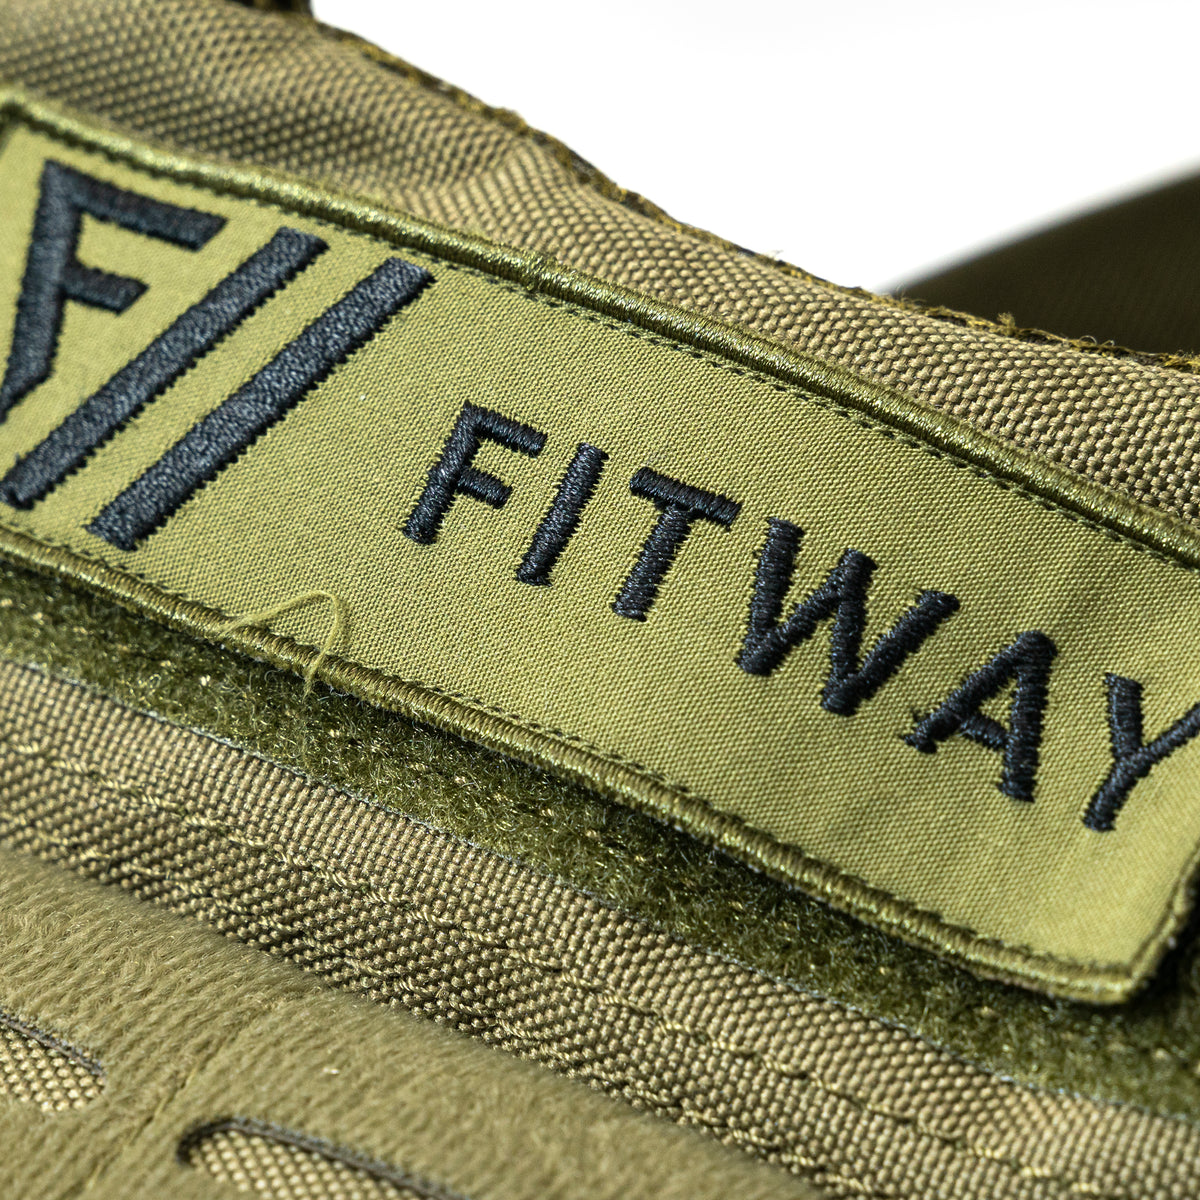 Fitway Equip. Tactical Weighted Vest - 15Kg